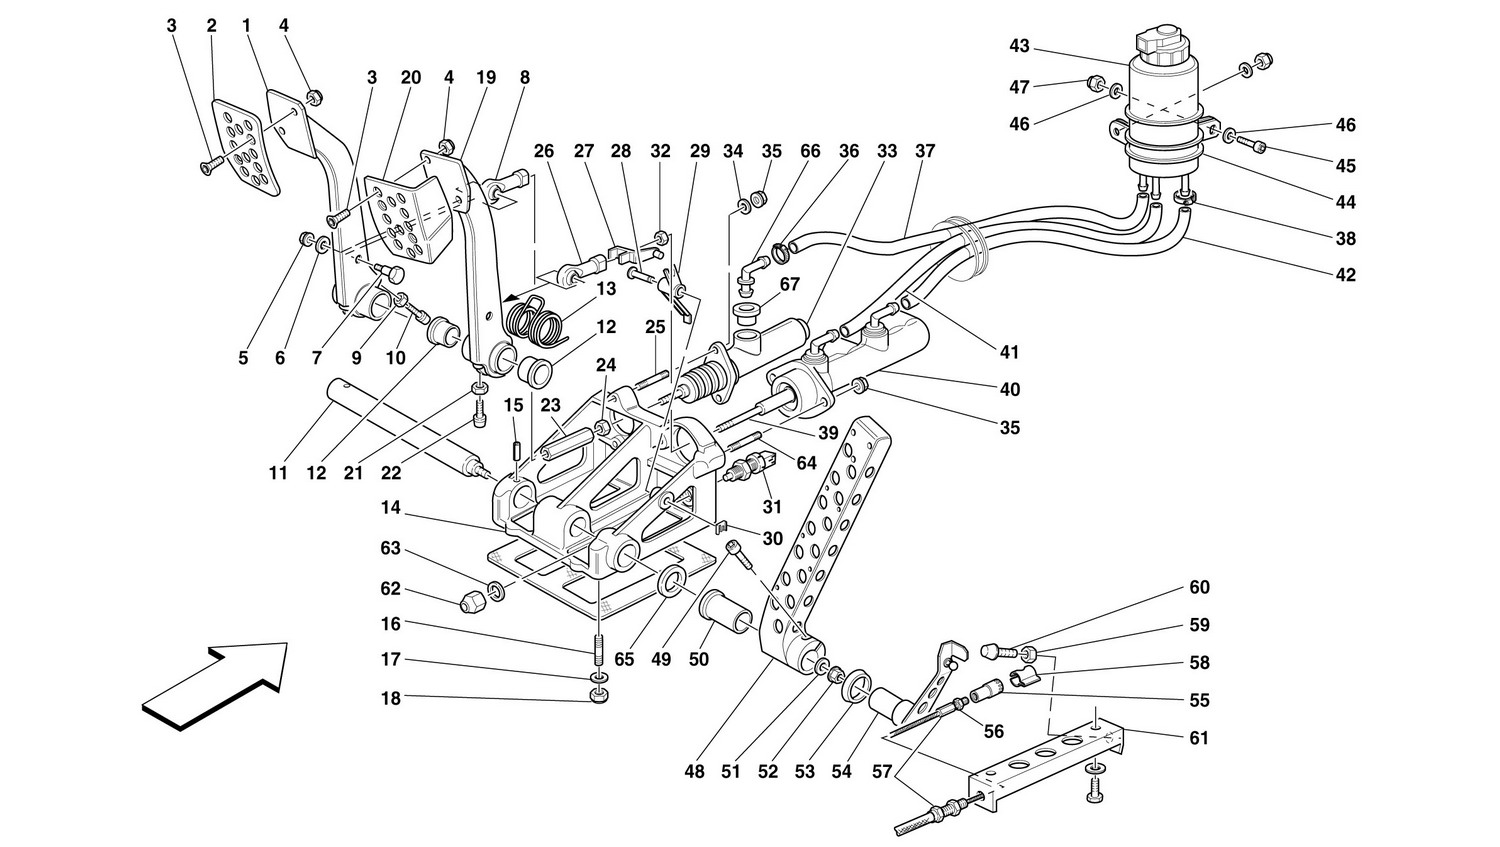 Schematic: Pedal Assembly